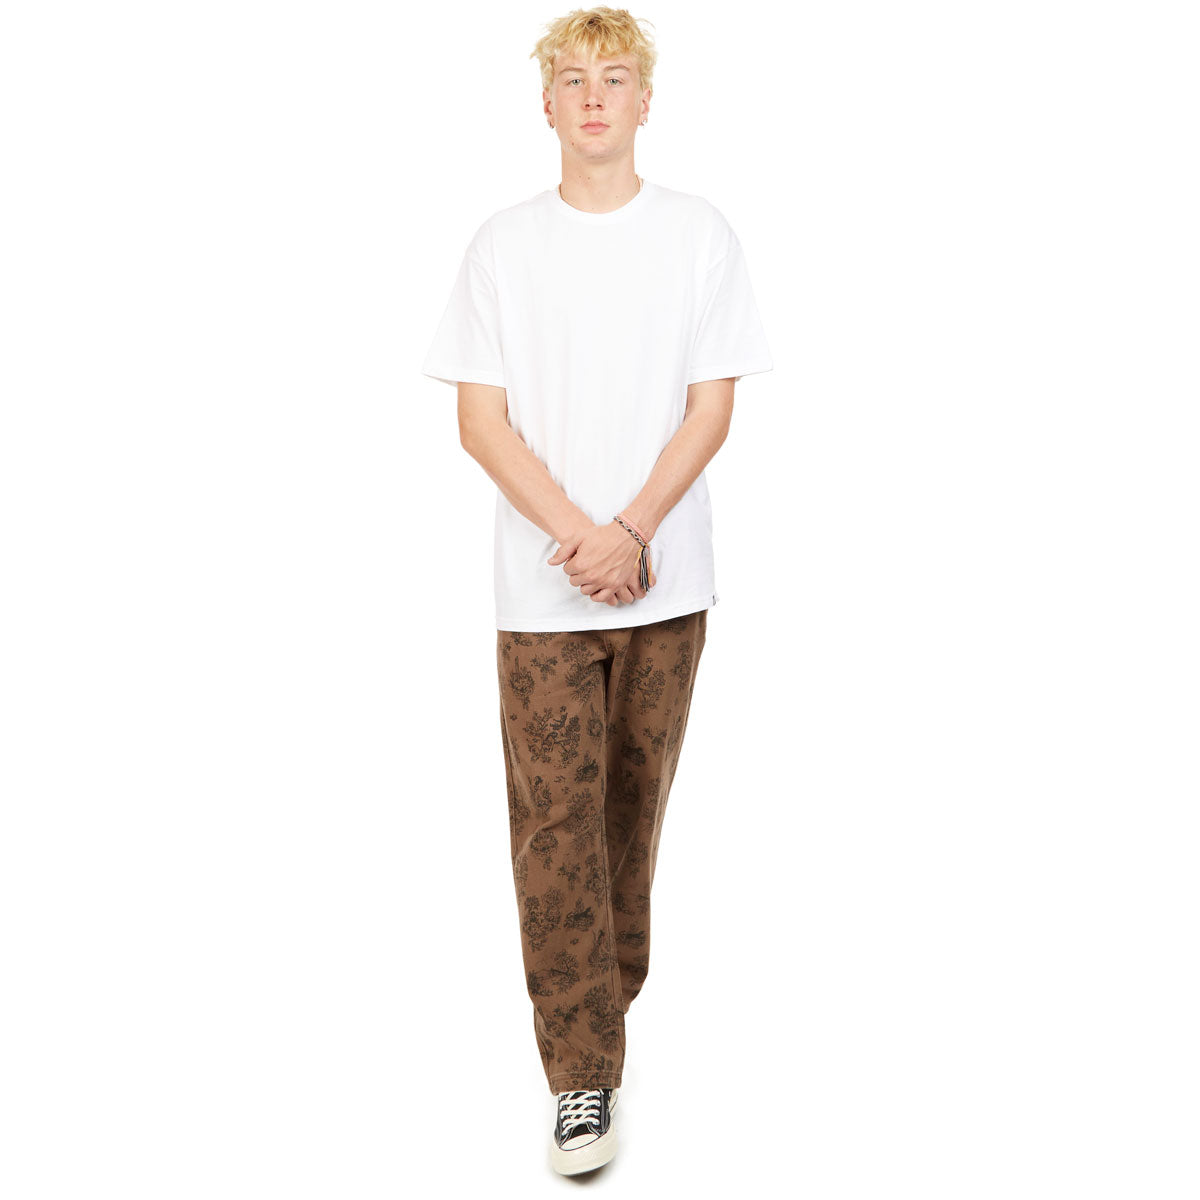 CCS Original Relaxed Toile Chino Pants - Brown Root image 3